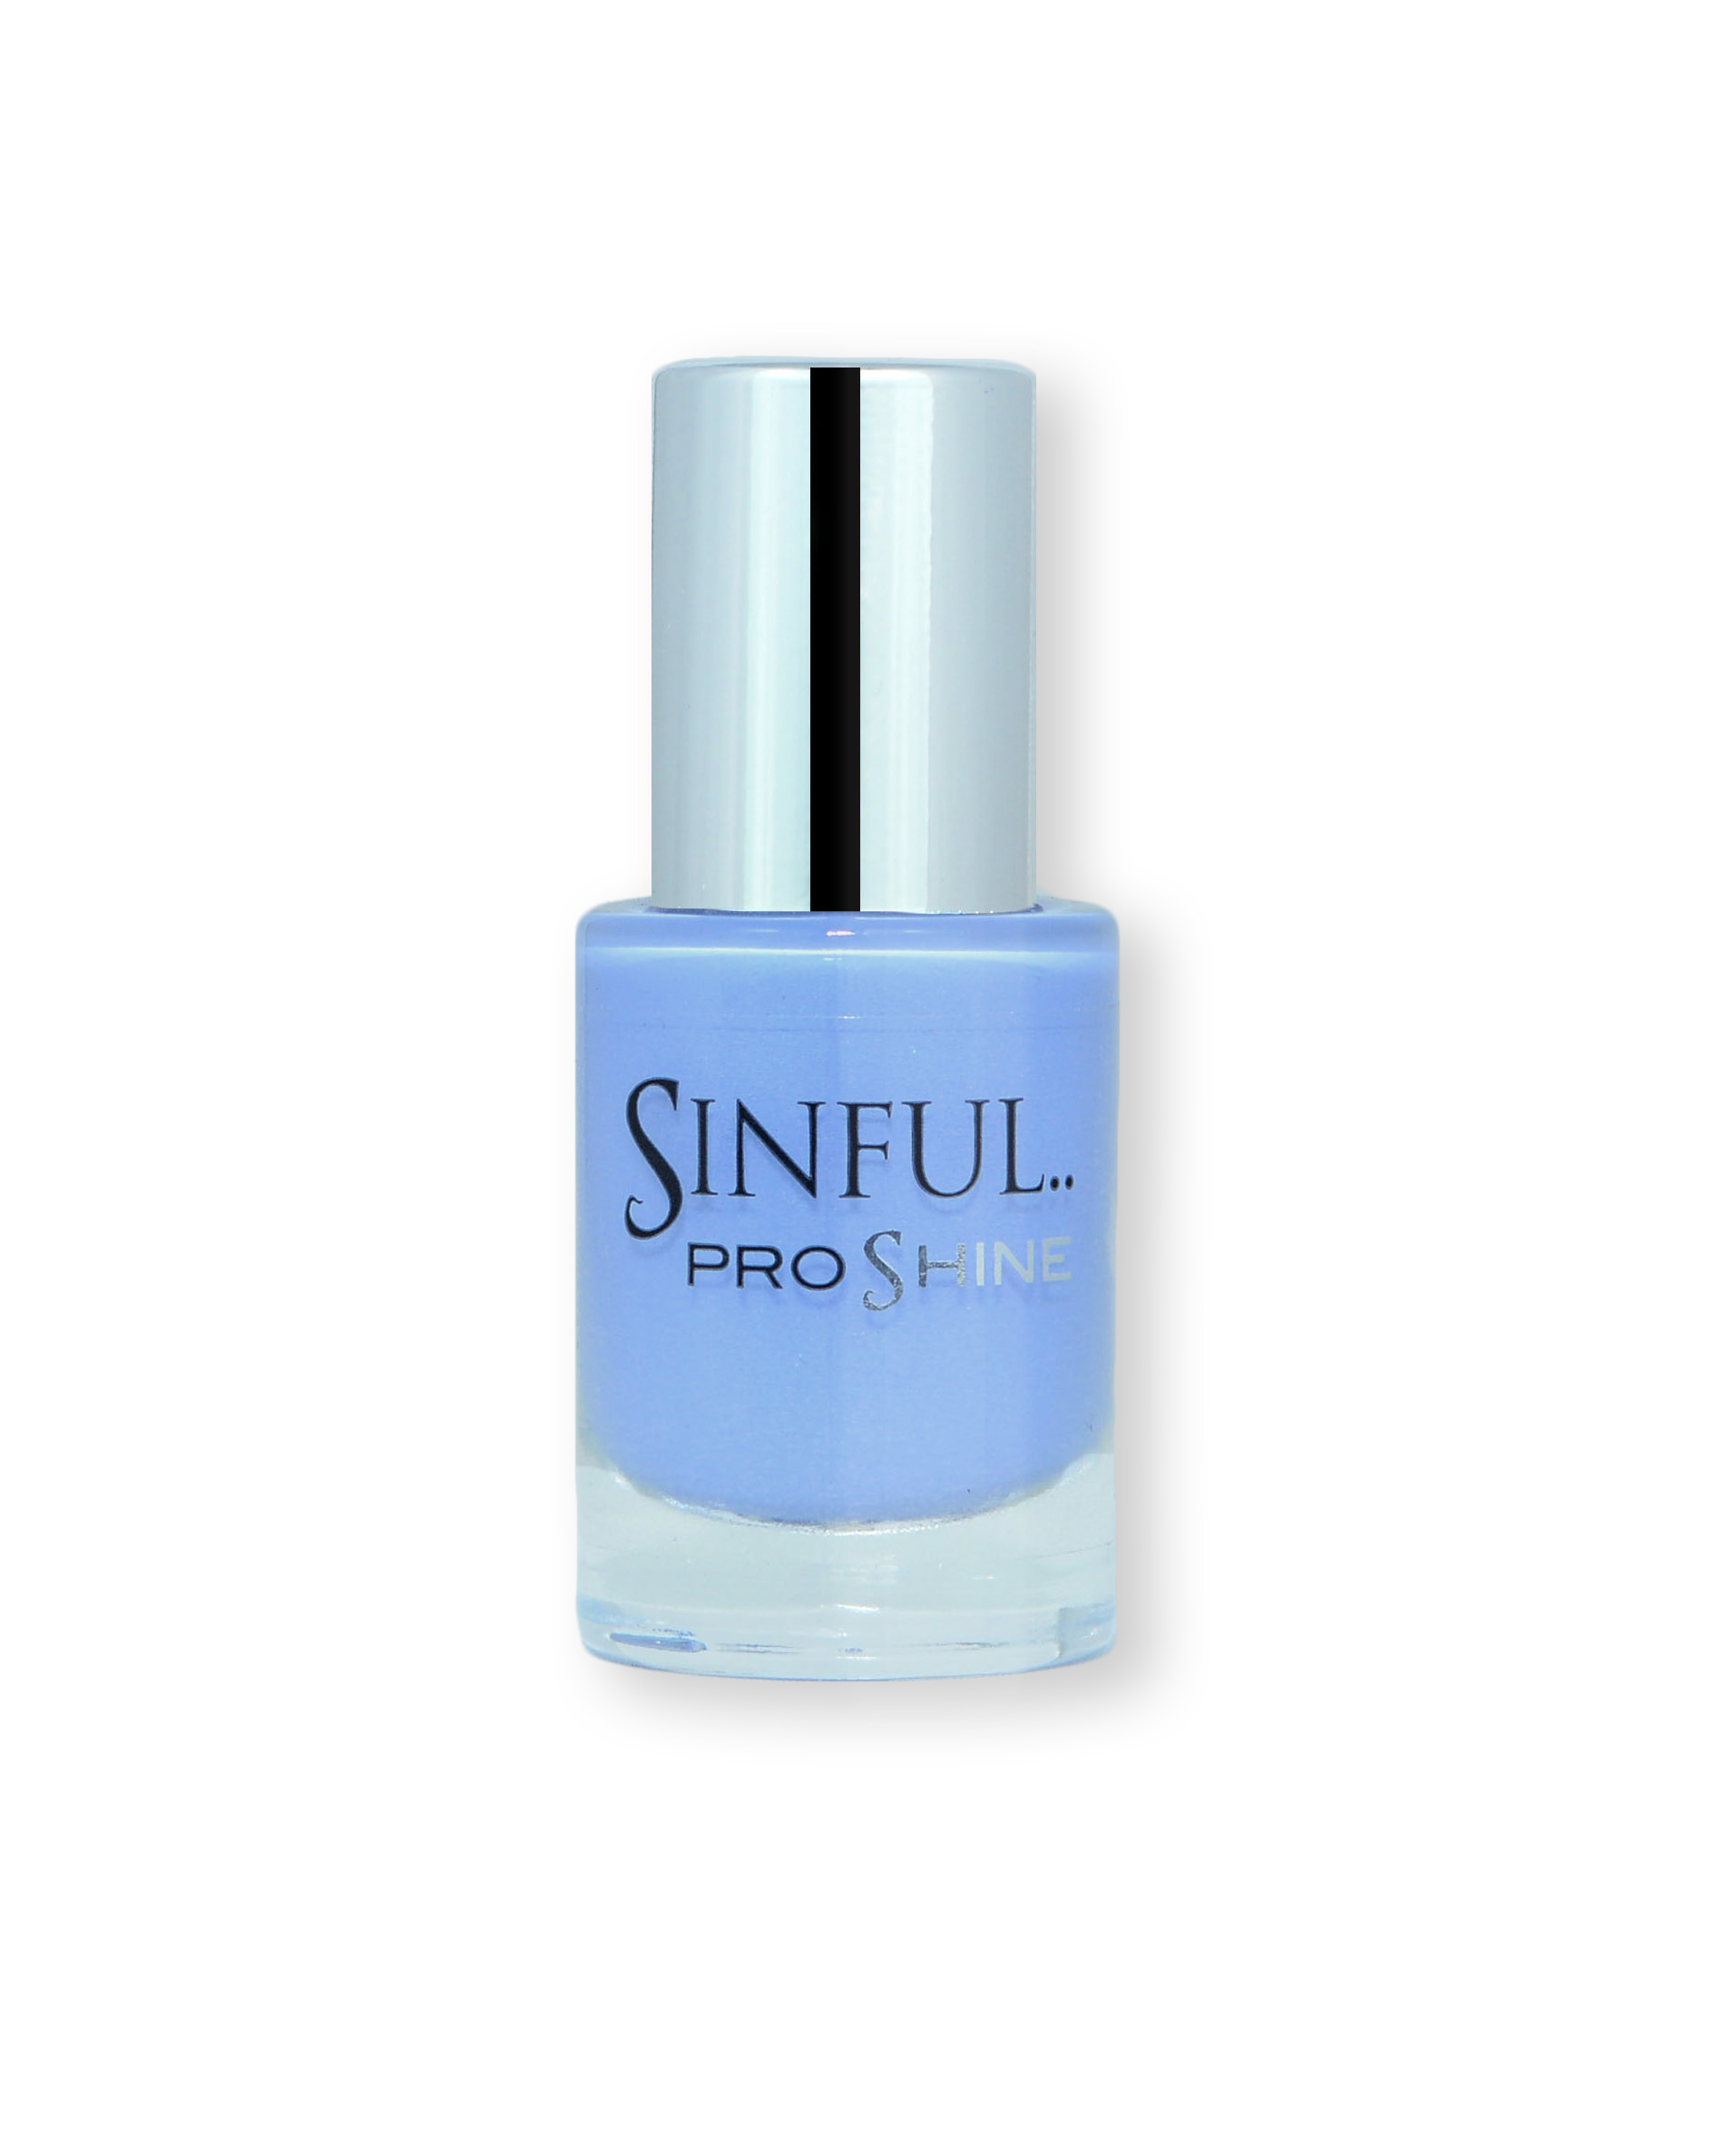 Sinful PROshine is a revolution into top spec imitation gel-like formula, easy application, full coverage and a sleek finish. Spoil yourself with the choice of 42 shades, expertly formulated with the finest grade of pigments. Sugar Daddy: Rich British blue with a soft shine finish